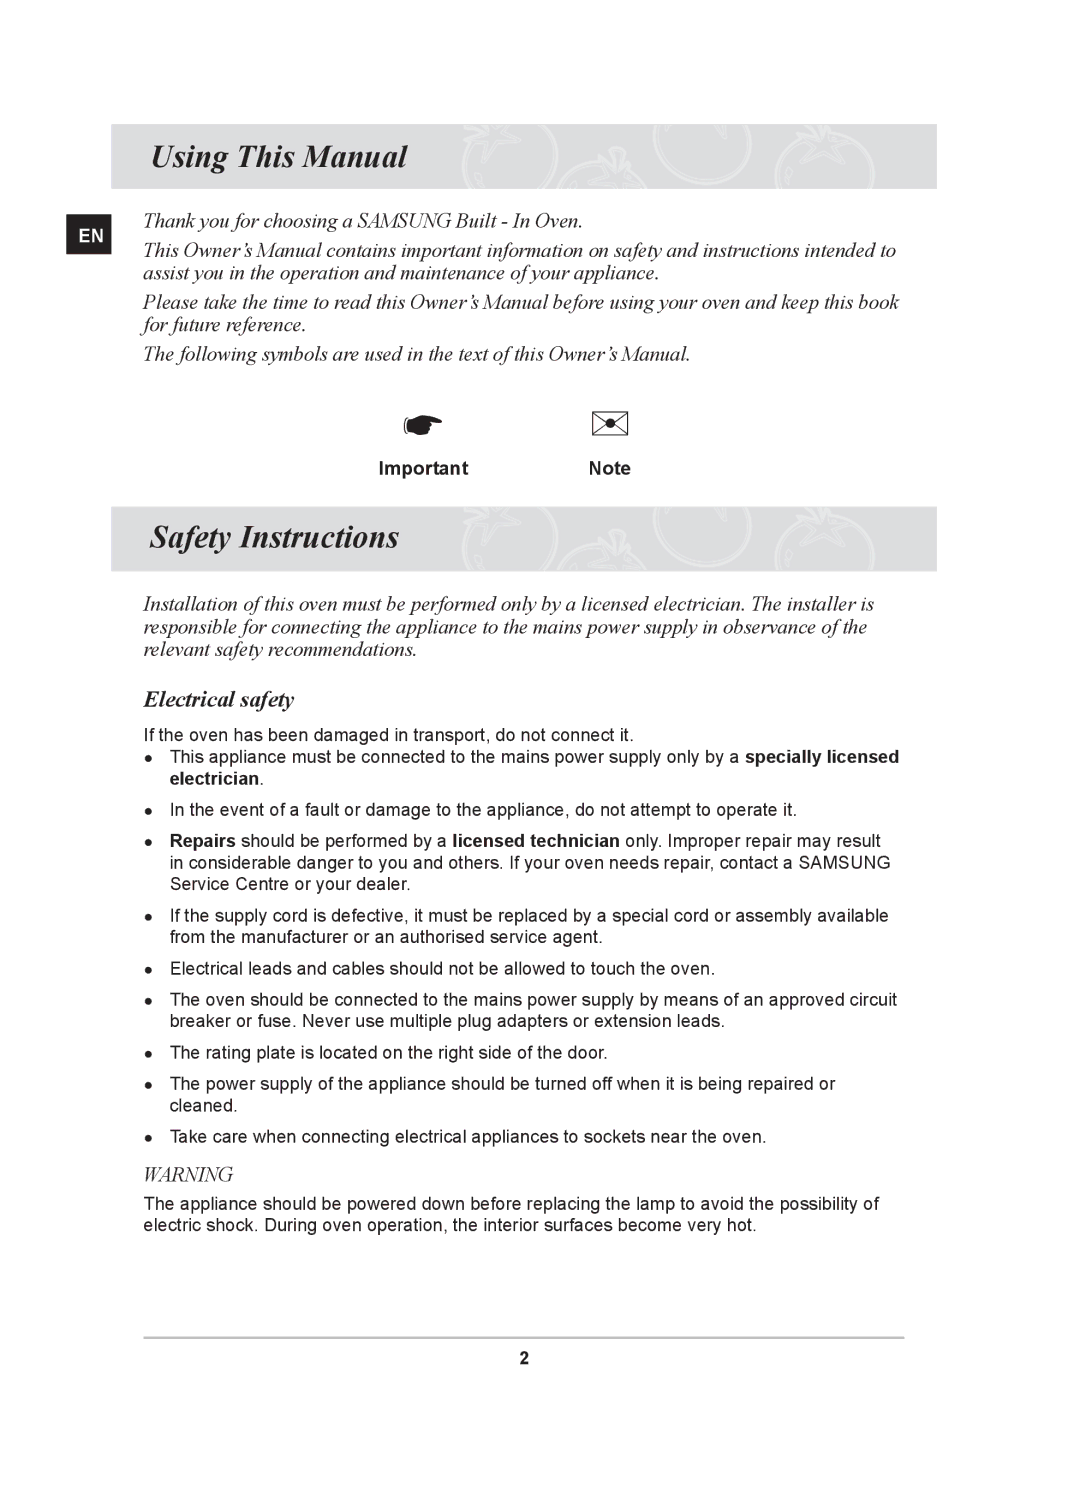 Samsung BF64CCST/SLI manual Using This Manual, Safety Instructions, Electrical safety, ImportantNote 